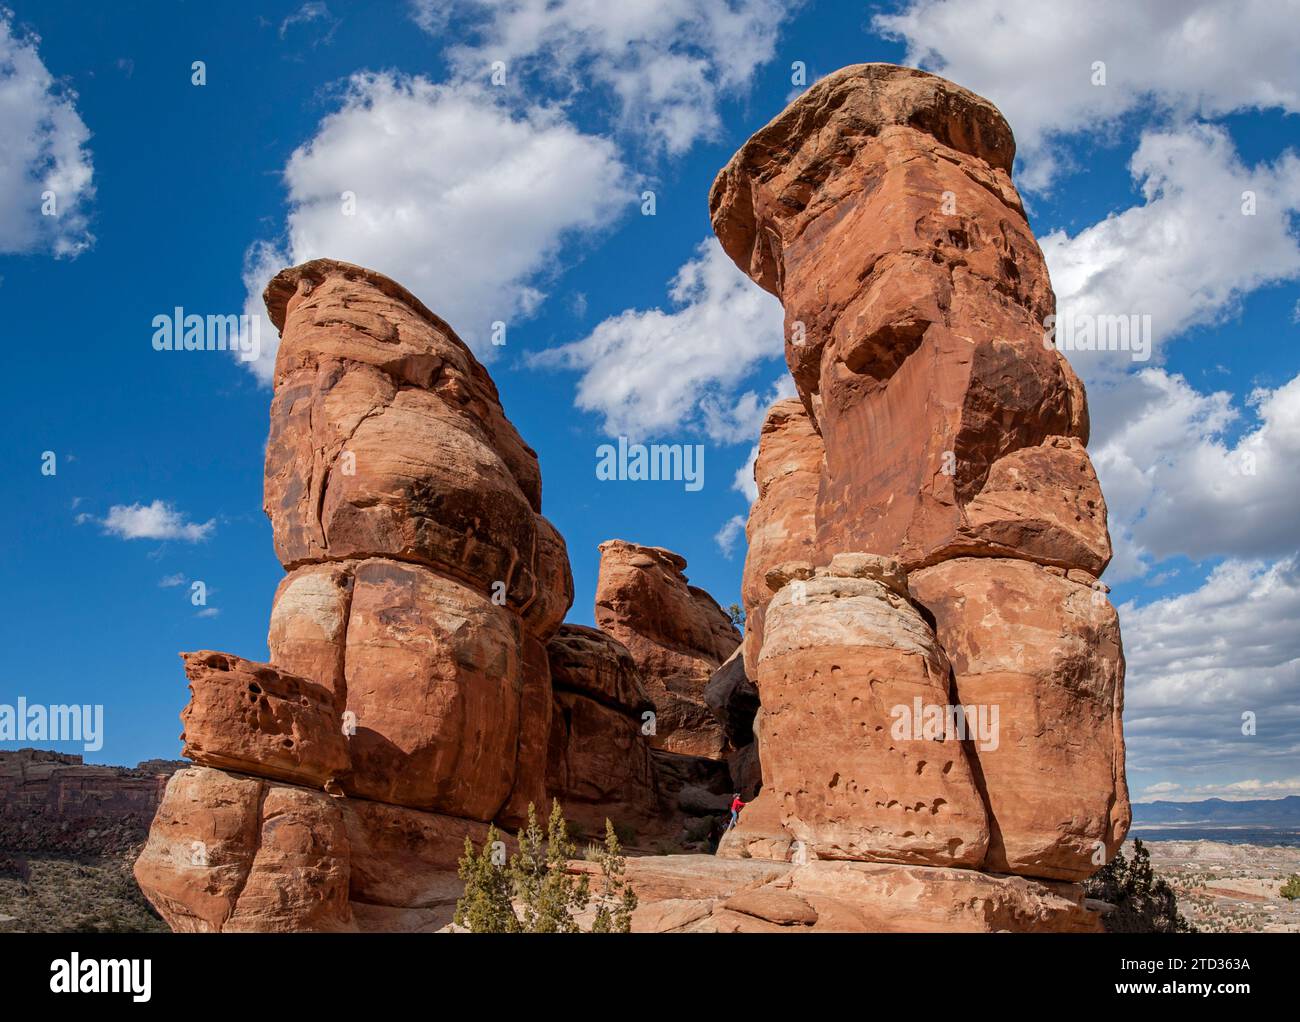 A peek inside the Devil's Kitchen, in the Colorado National Monument. Stock Photo